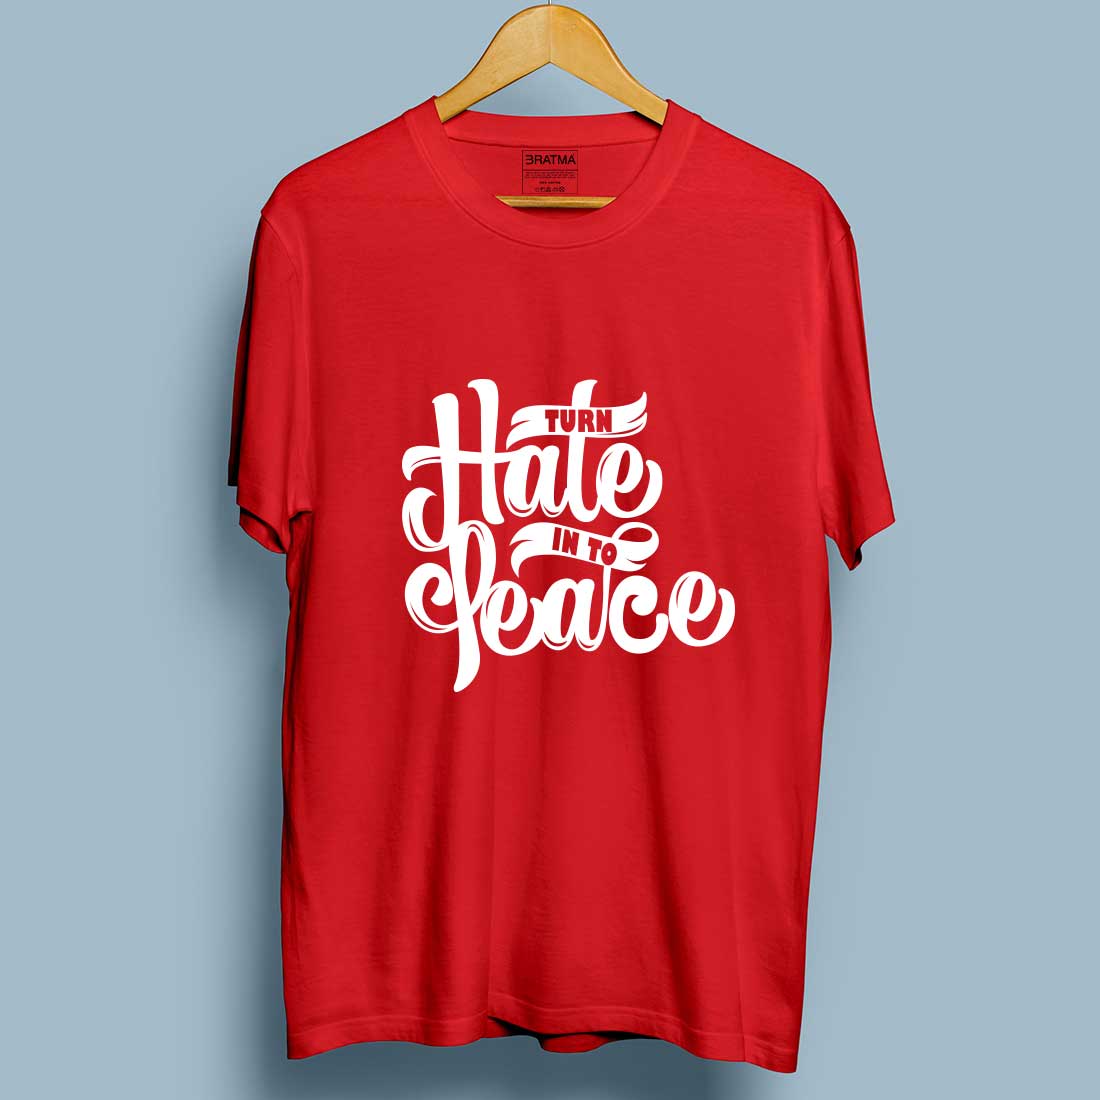 Turn Hate Into Peace Red Women T-Shirt